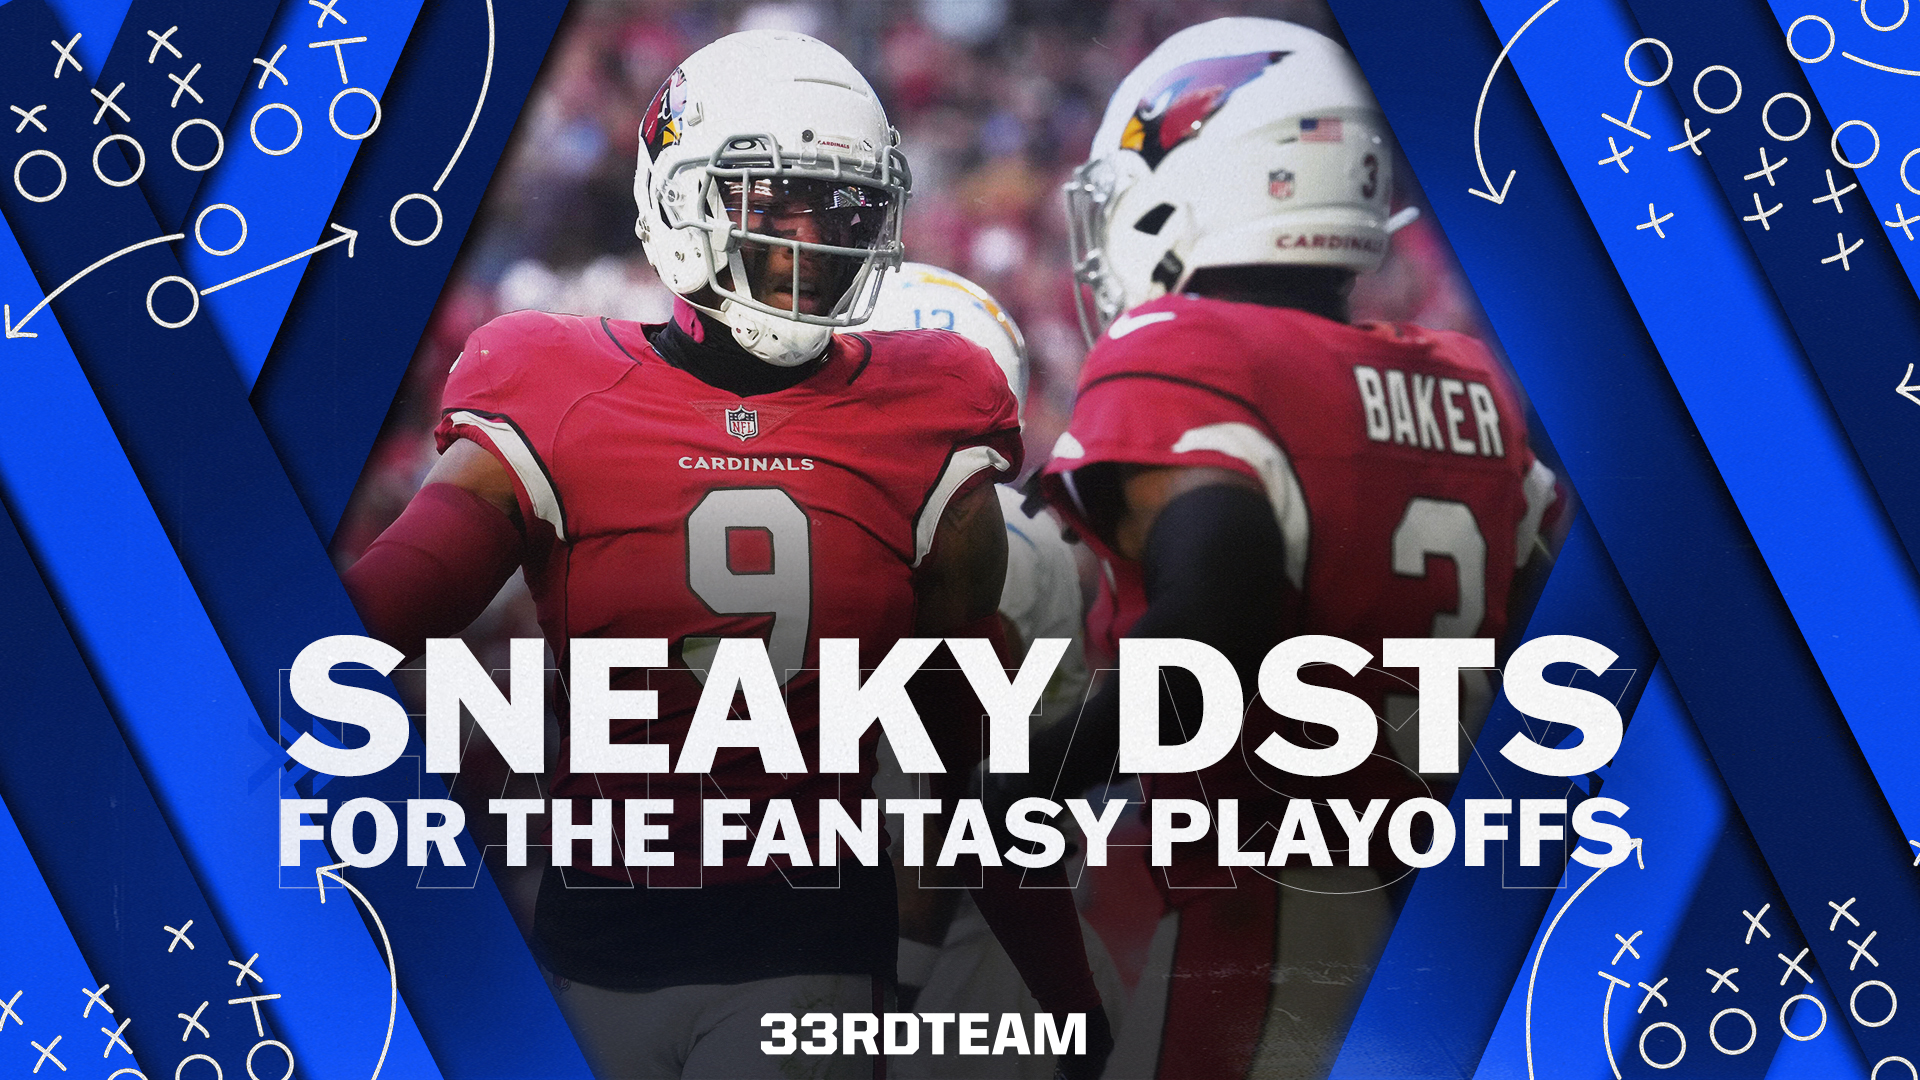 Browns, Cardinals Among Eight Sneaky D/STs for Fantasy Football Playoffs